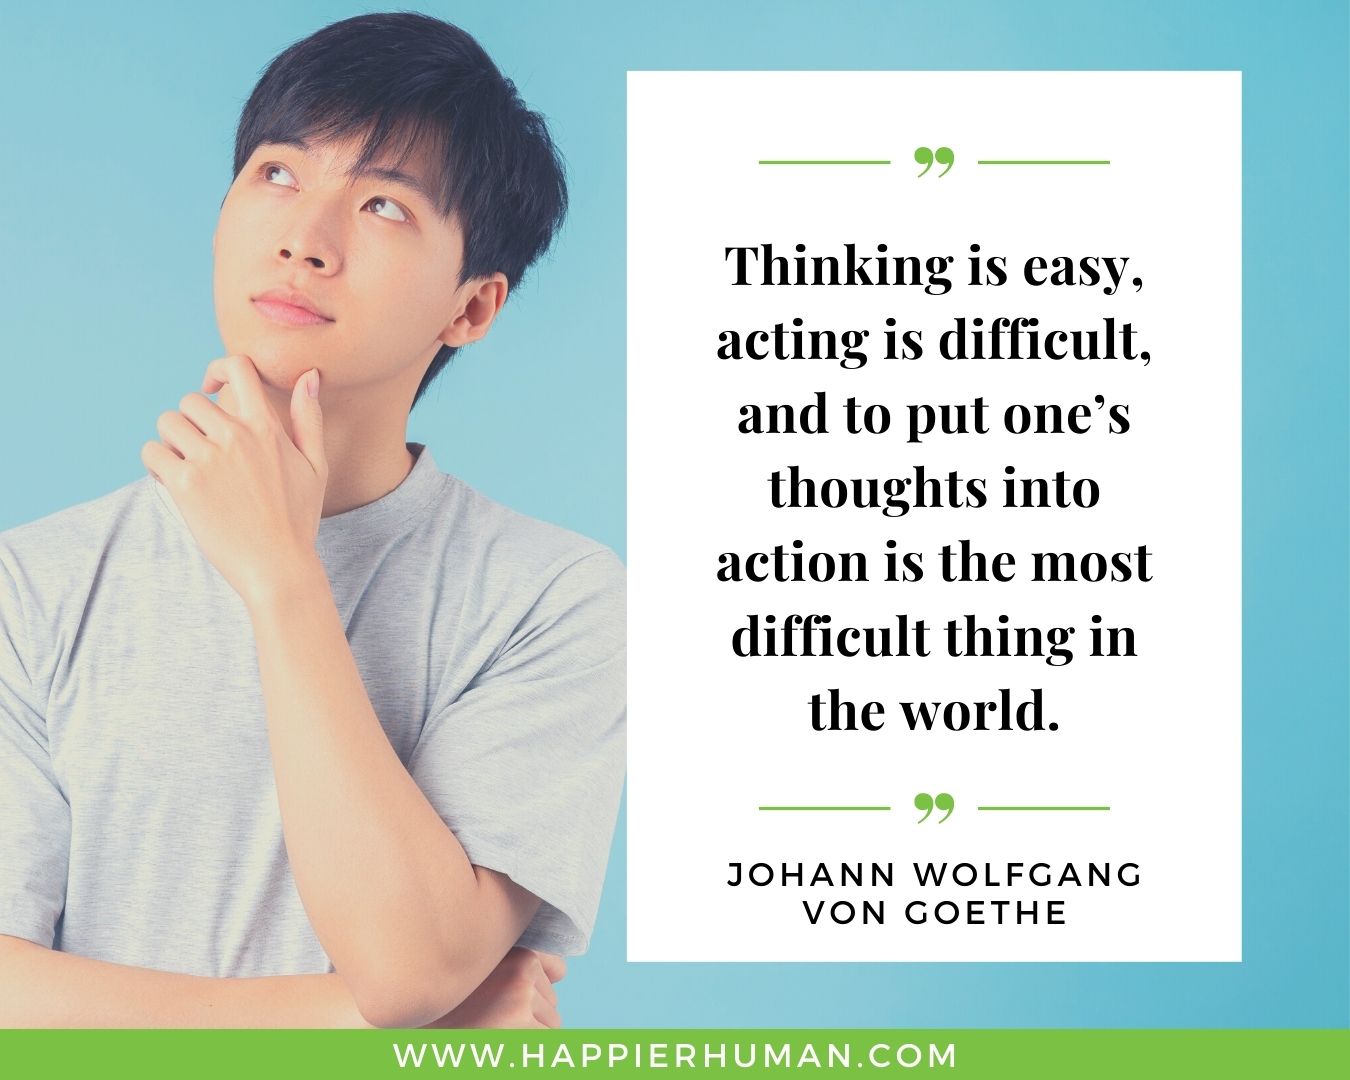 Overthinking Quotes - “Thinking is easy, acting is difficult, and to put one’s thoughts into action is the most difficult thing in the world.” - Johann Wolfgang von Goethe